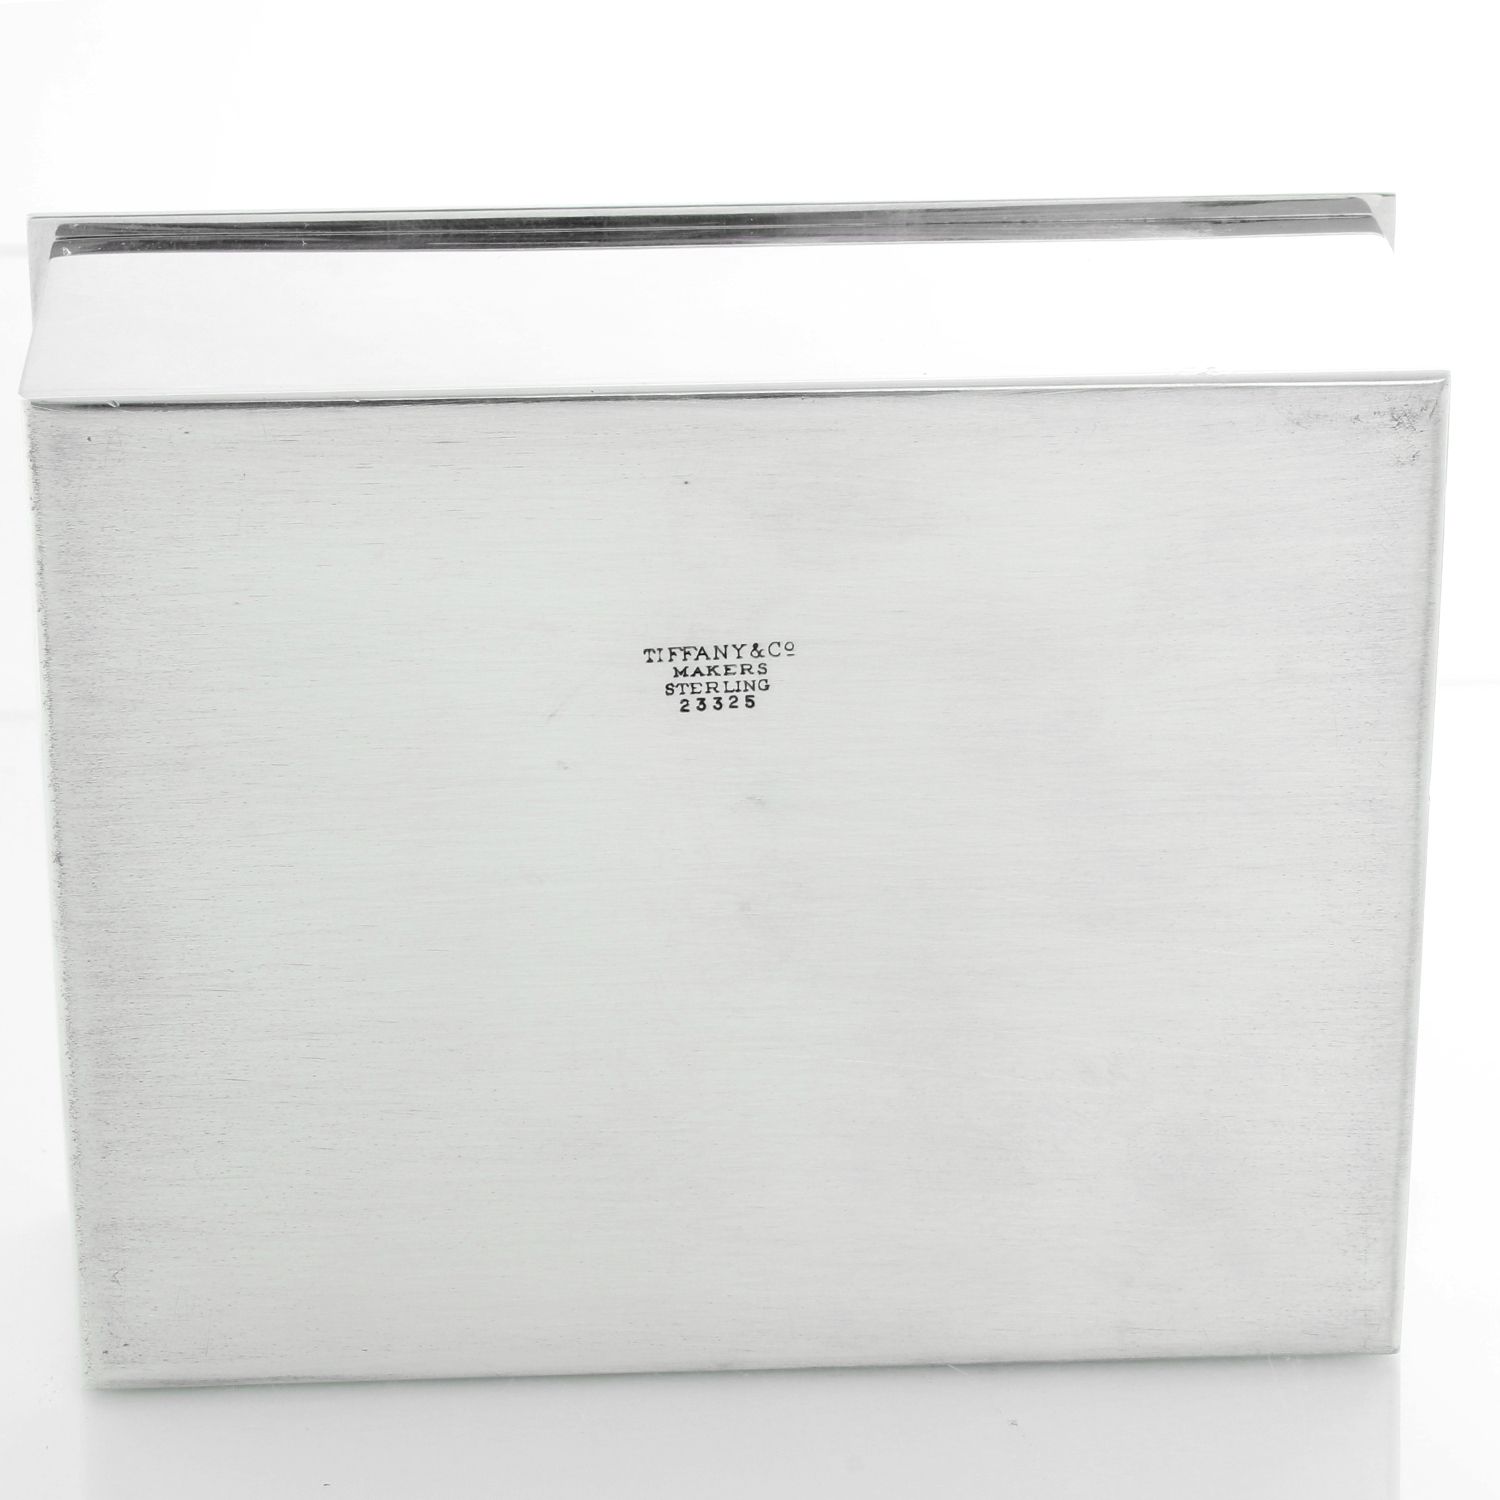 Tiffany Classic Box in Sterling Silver with Cedar lining, Size: 4.25 x 3.75 in.